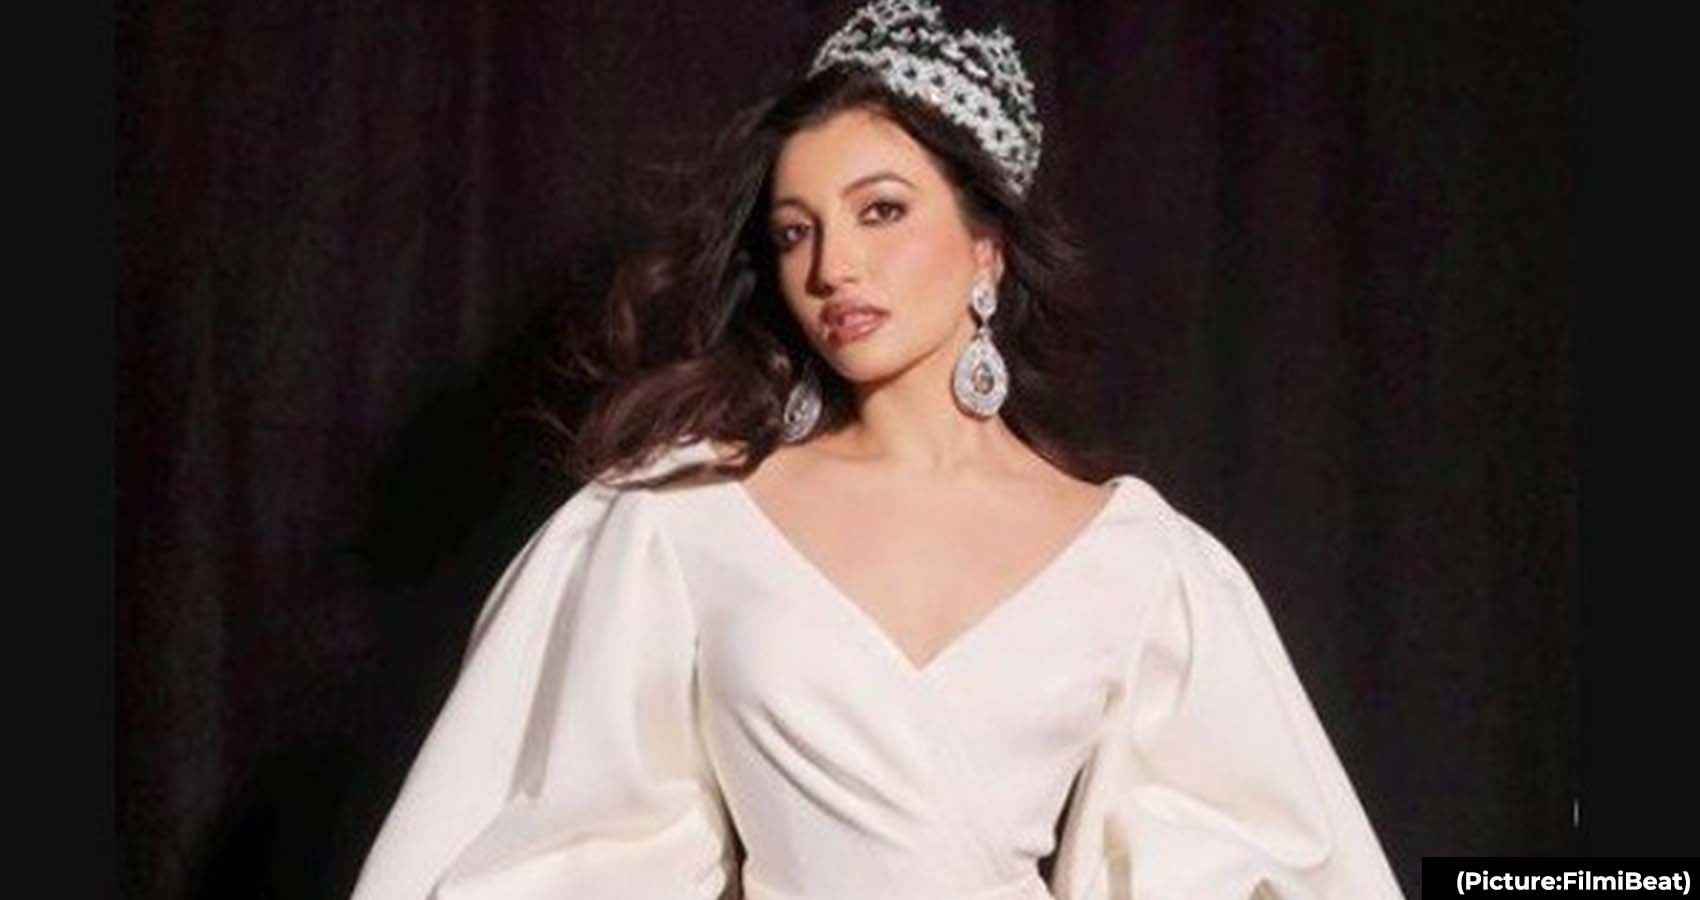 Shree Saini Crowned First Runner-Up At Miss World Pageant